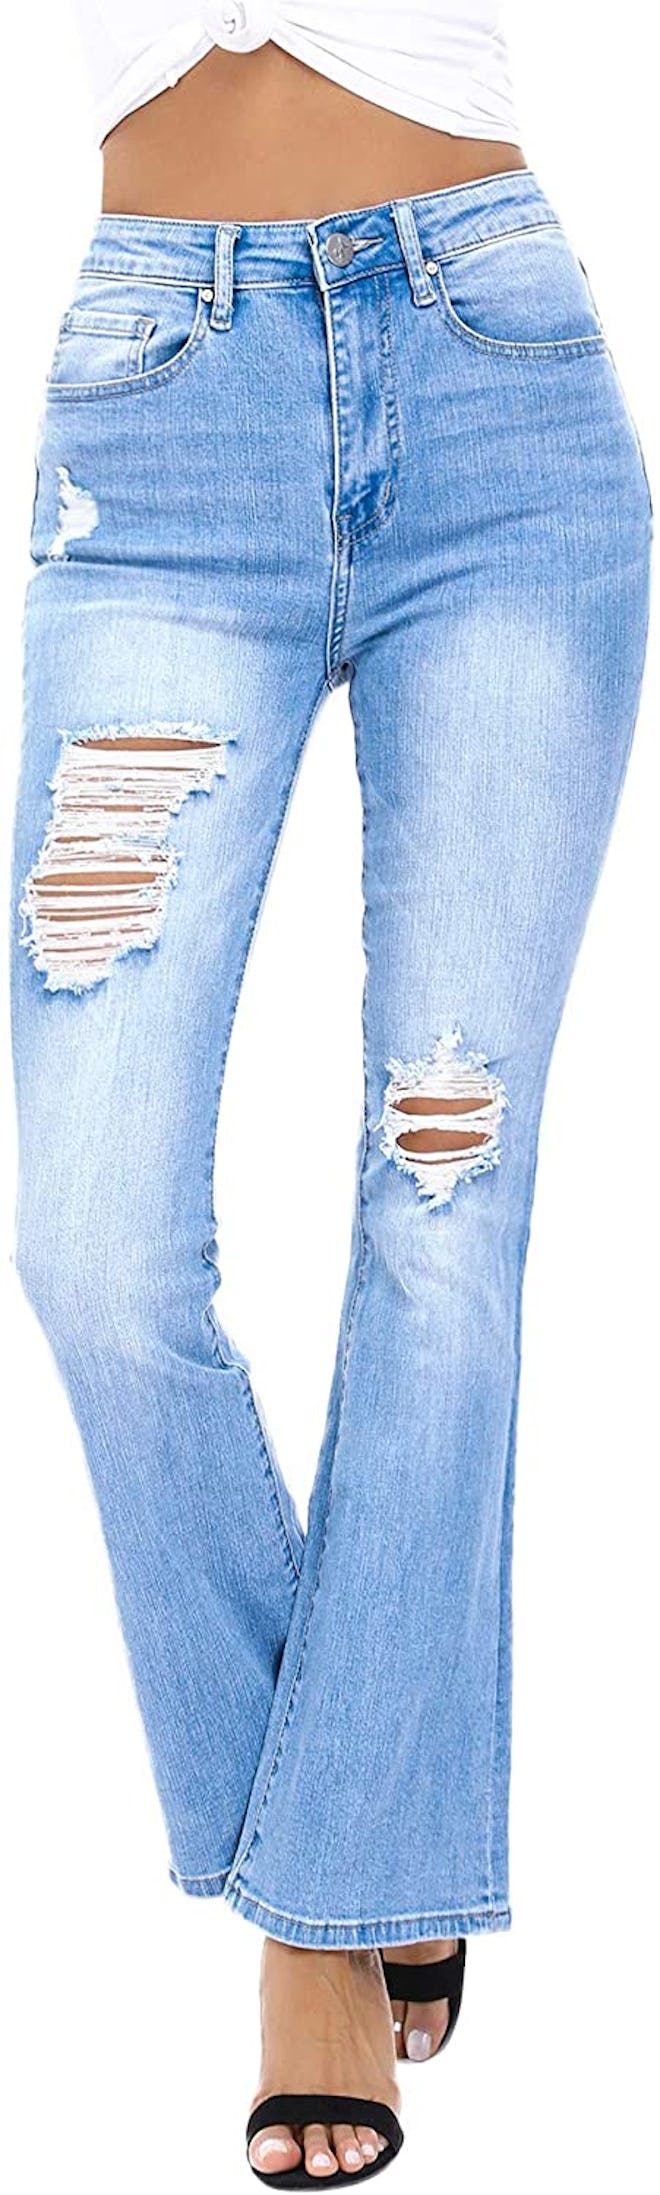 Resfeber Ripped Flare Jeans